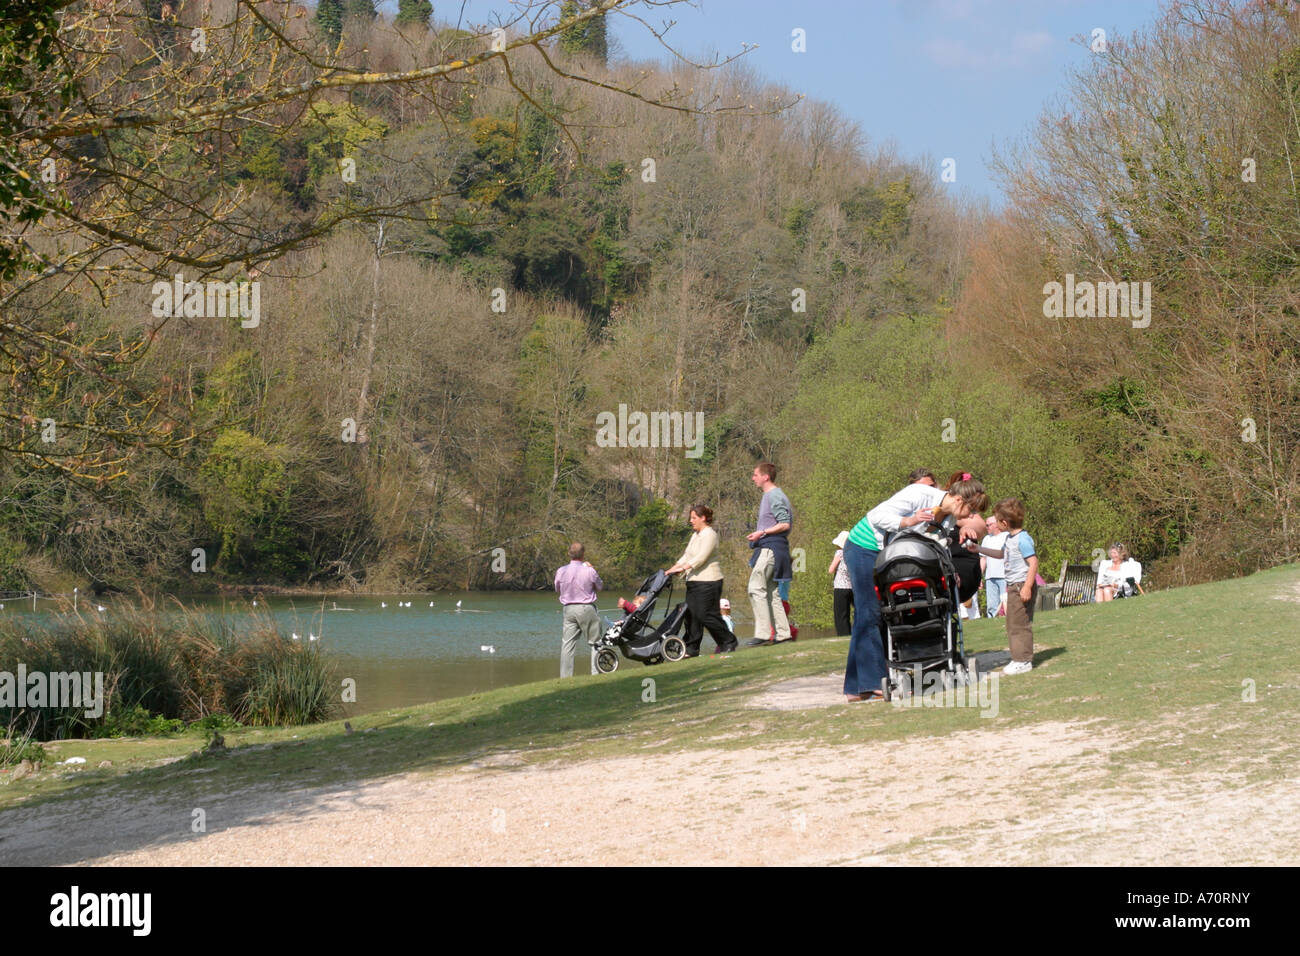 Families enjoying a sunny day in the park at Swanbourne Lake, Arundel, West Sussex, UK. Stock Photo